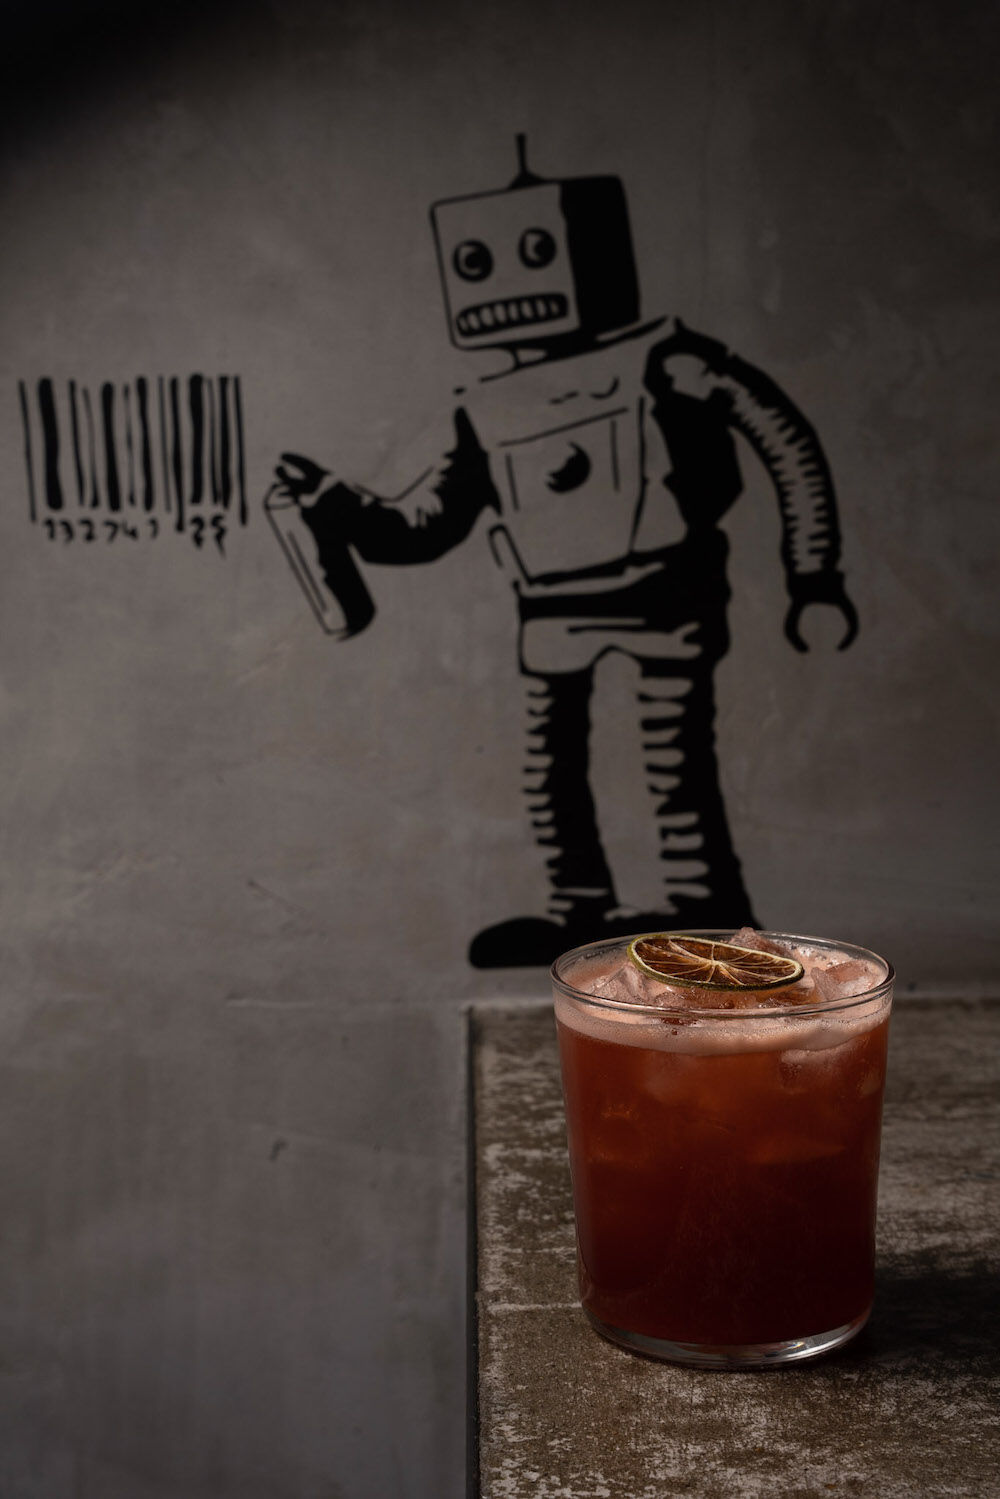 Hoxton Manor - cocktail and robot